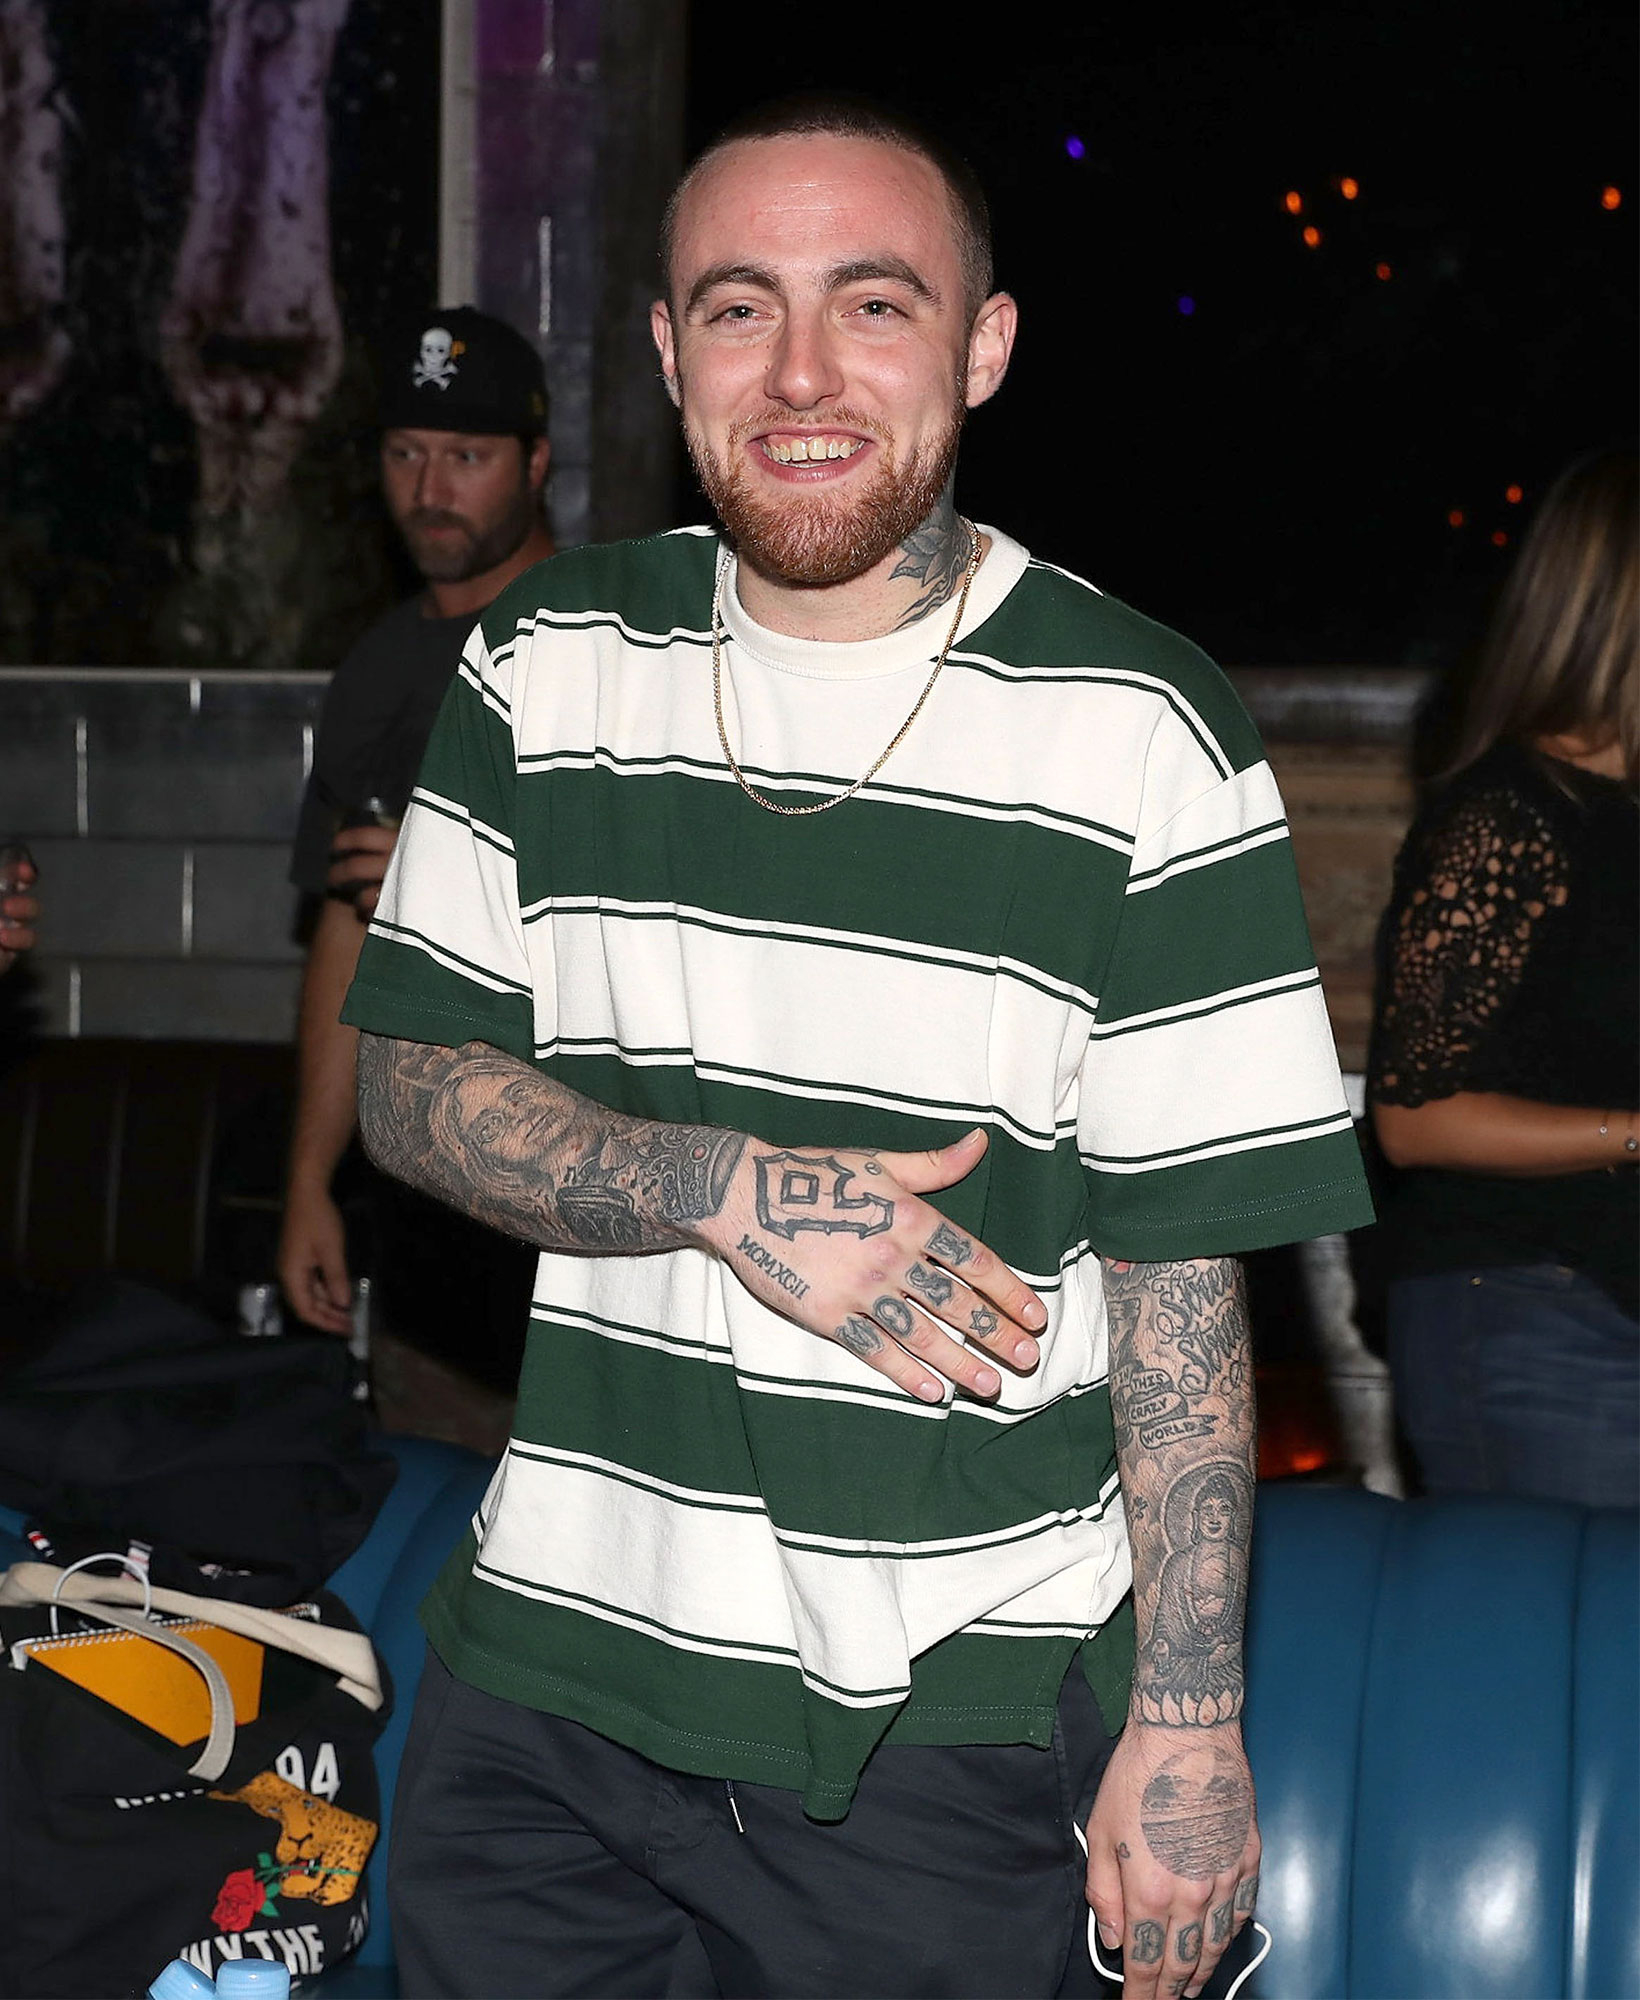 Fascinating Mac Miller Sleeve Tattoos Mac Miller Chest Tattoo for measure.....